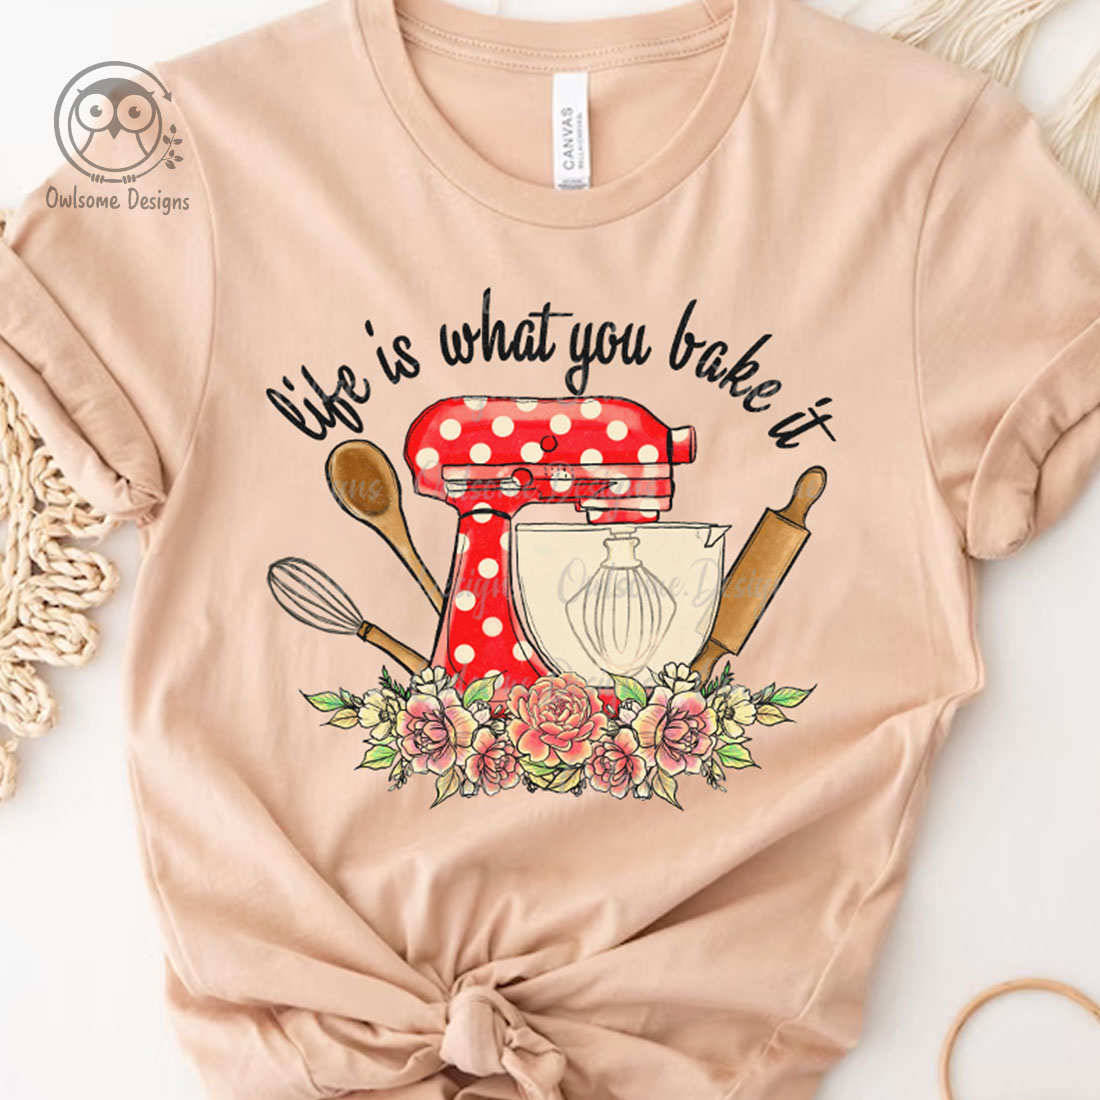 Image of a beautifully printed t-shirt with a food processor for baking.